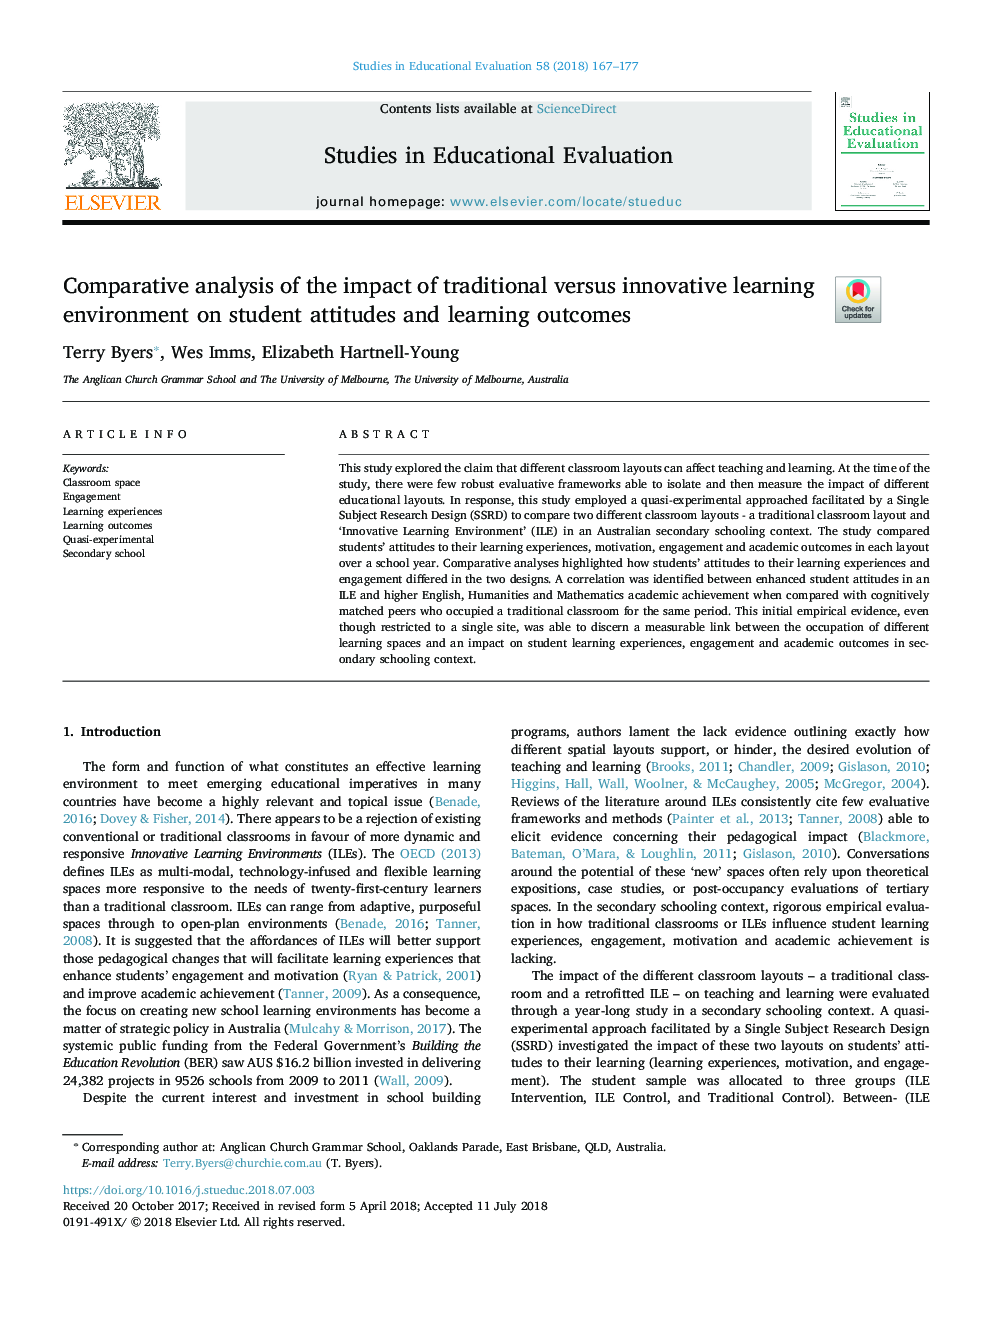 Comparative analysis of the impact of traditional versus innovative learning environment on student attitudes and learning outcomes